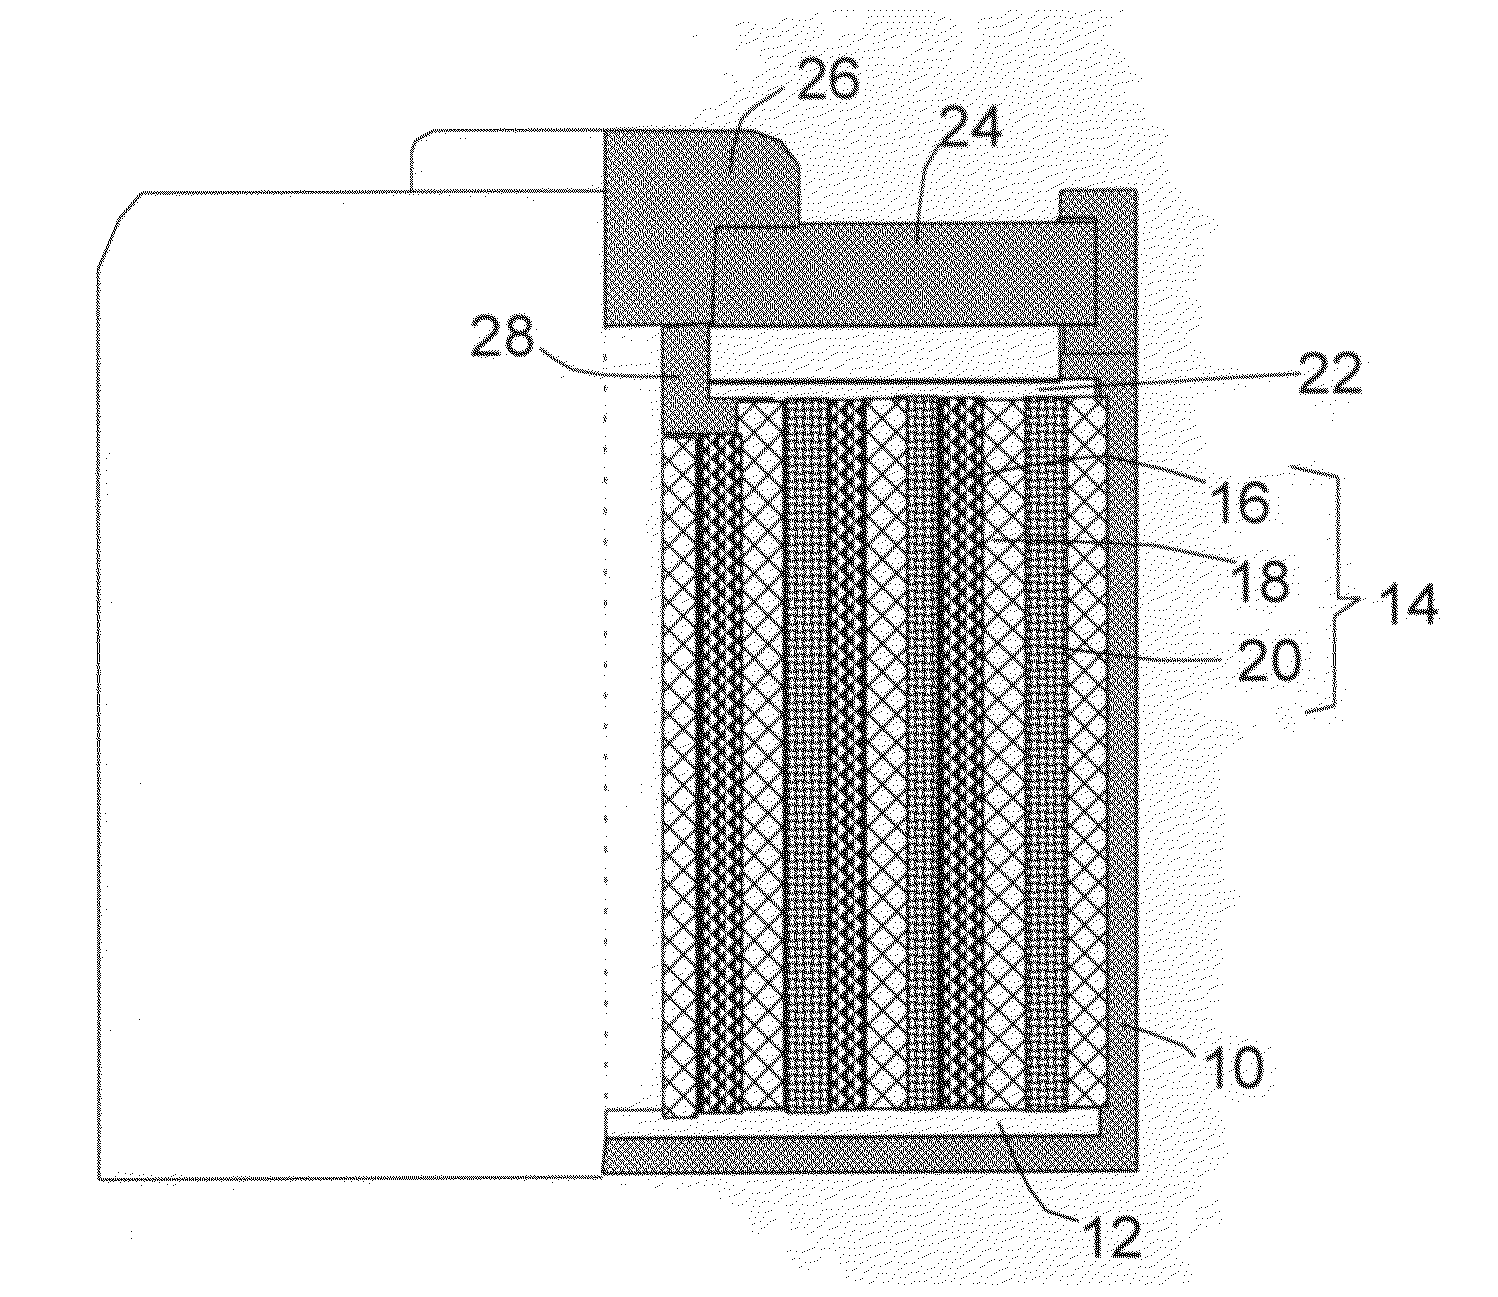 Anode compositions for  lithium secondary batteries